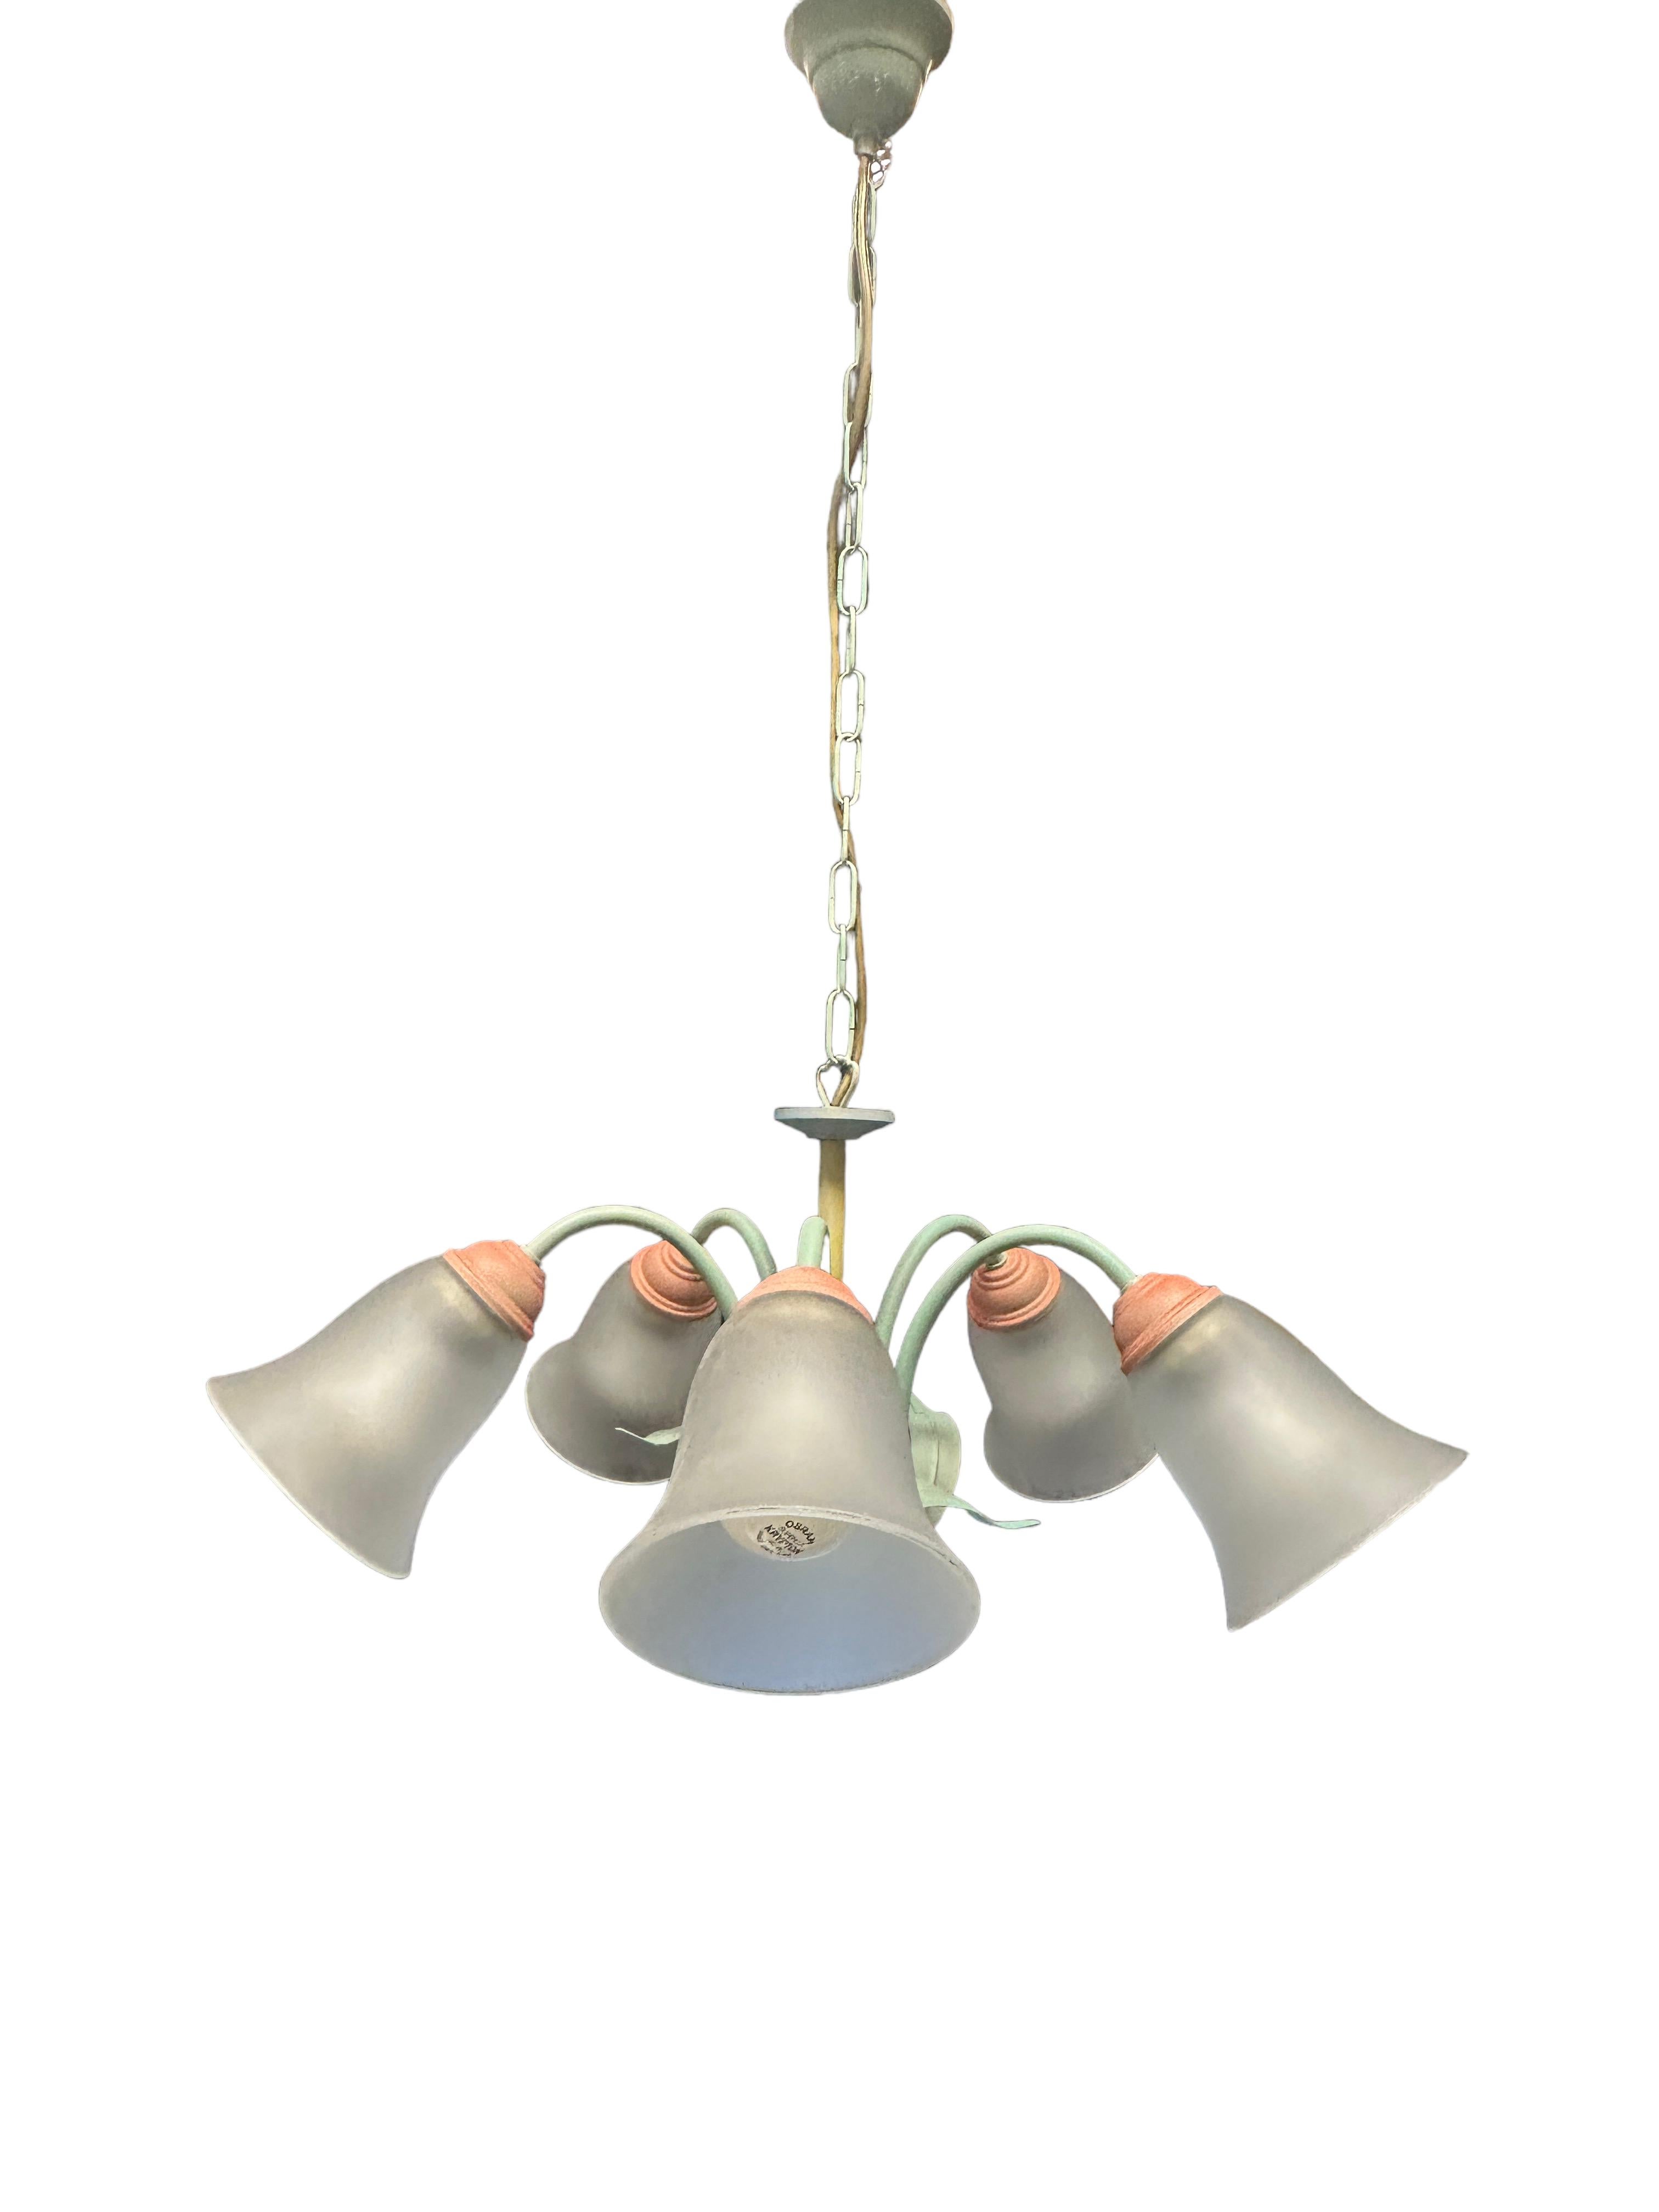 Petite Florentine style five-light chandelier. Functions as is with five E27 / 110 Volt light bulbs. Can take up to 60 Watts each bulb. Beautiful metal chandelier with flower glass shades. Colors are a light green and a apricot red. It gives a very